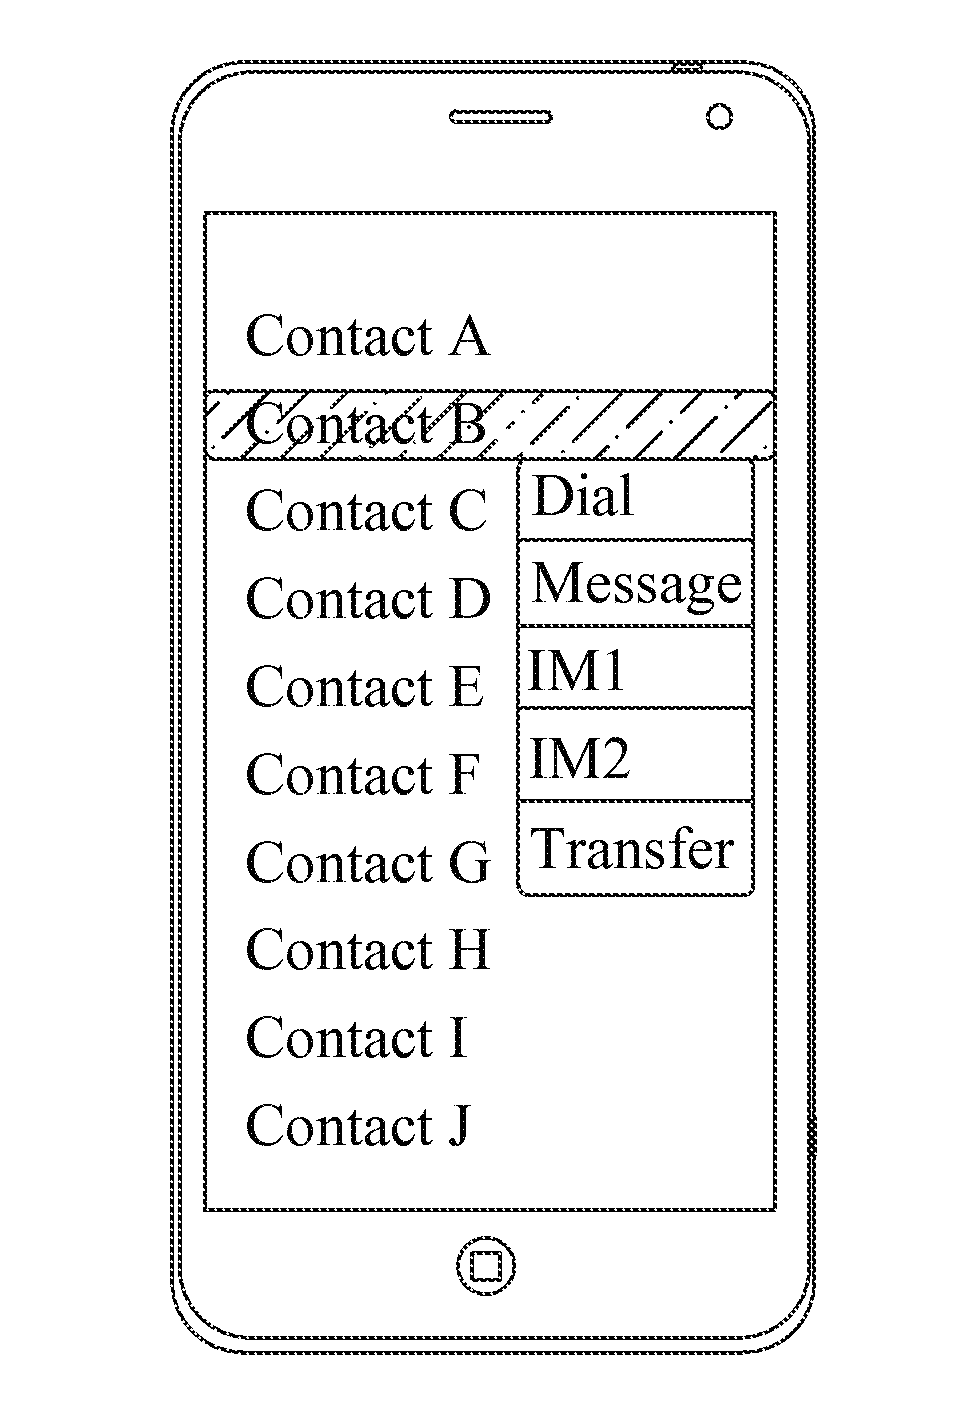 Method, device and storage medium for starting application in electronic apparatus